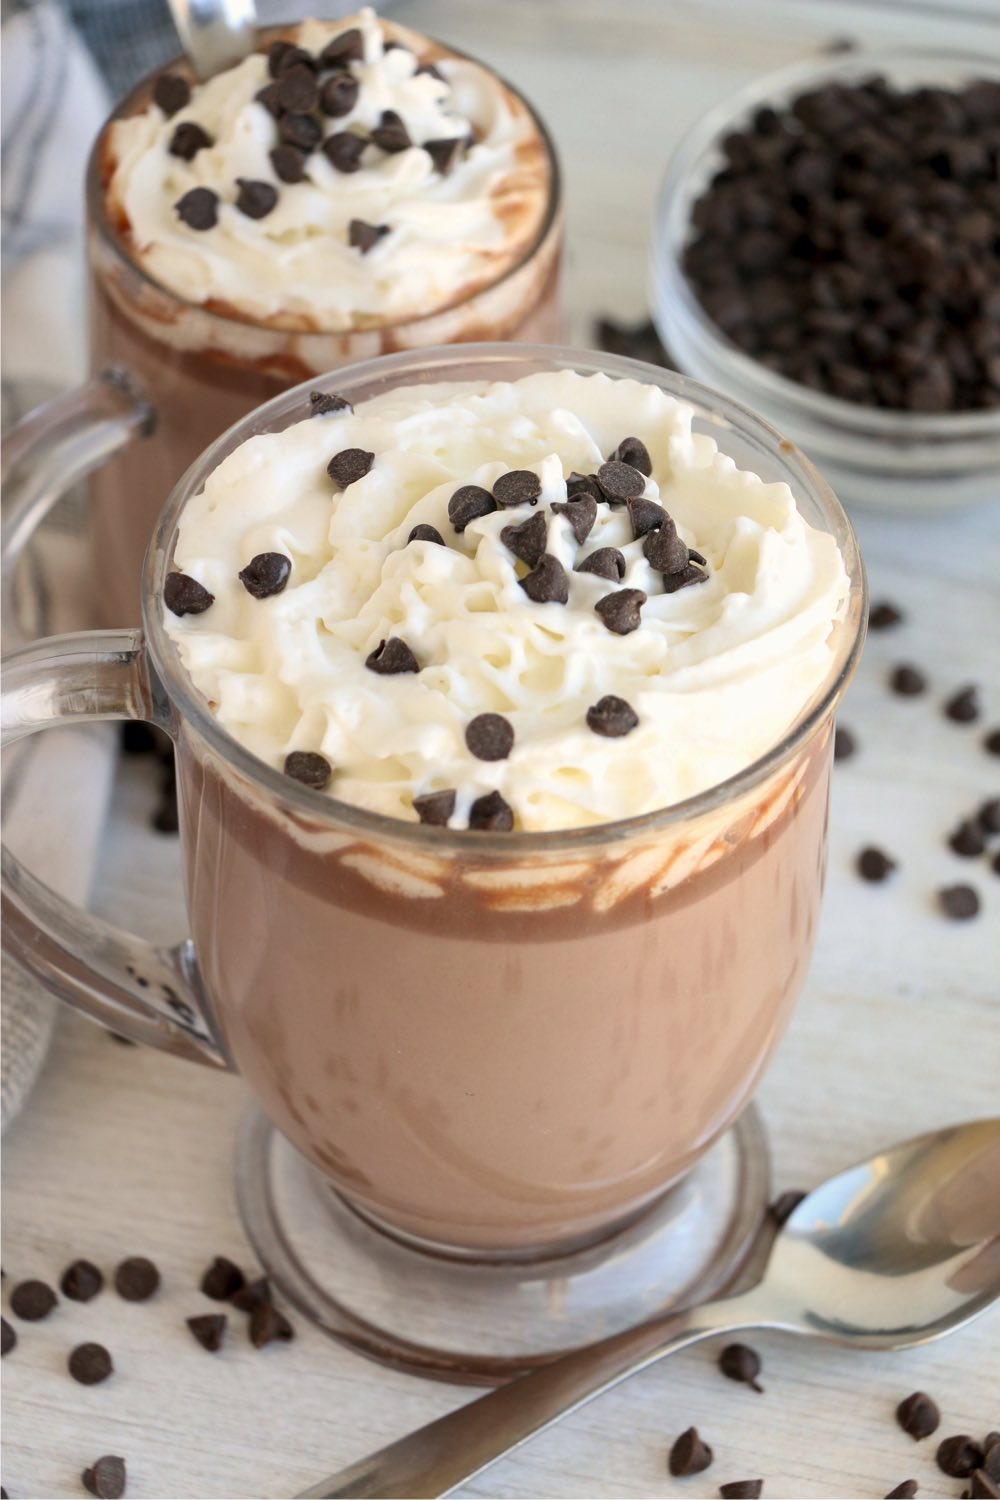 whipped cream and chocolate chips on top of hot chocolate